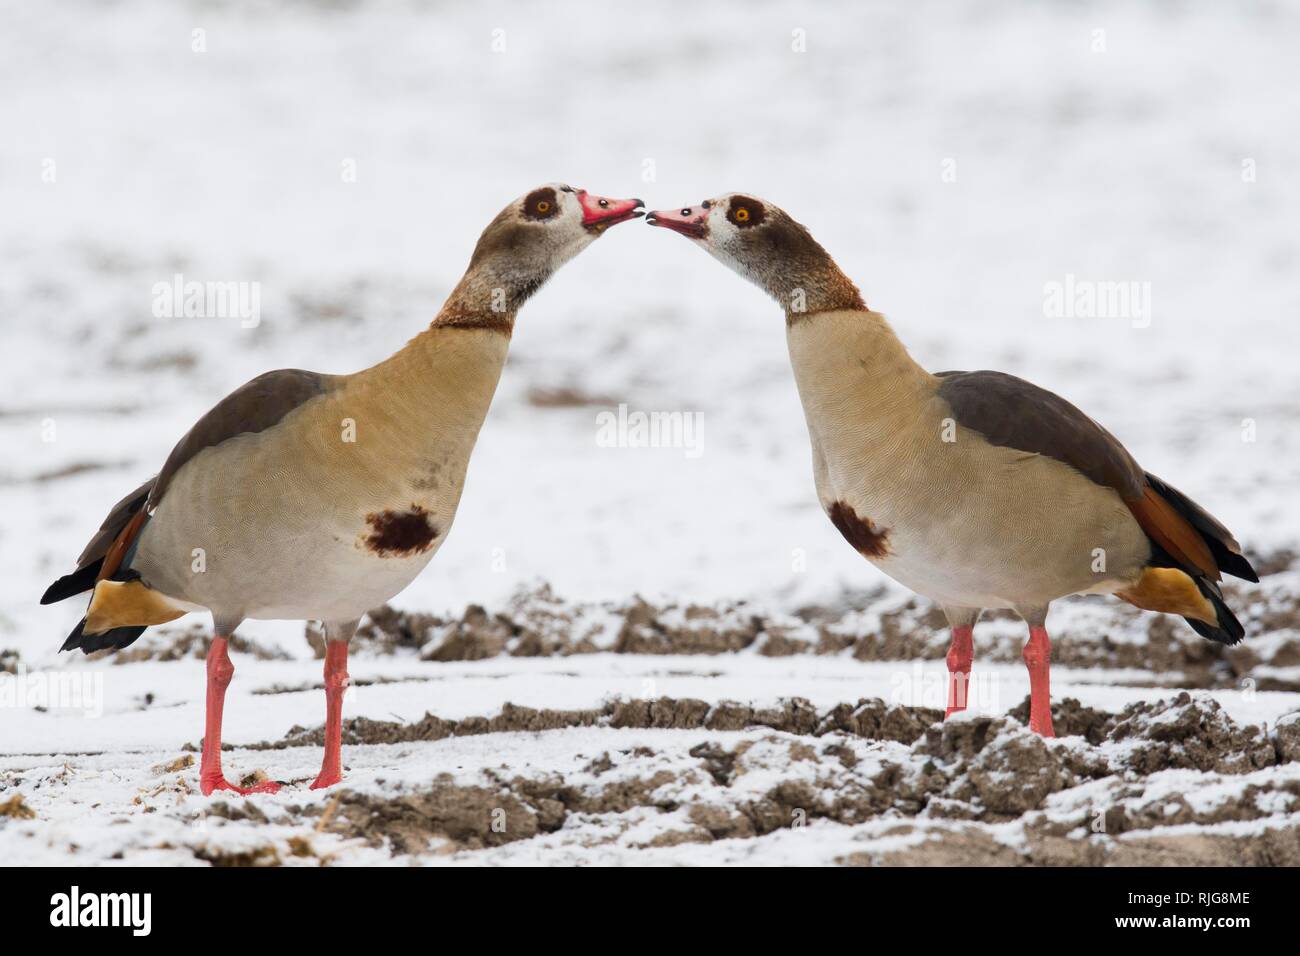 Two Egyptian geese (Alopochen aegyptiacus) in snow, Emsland, Lower Saxony, Germany Stock Photo